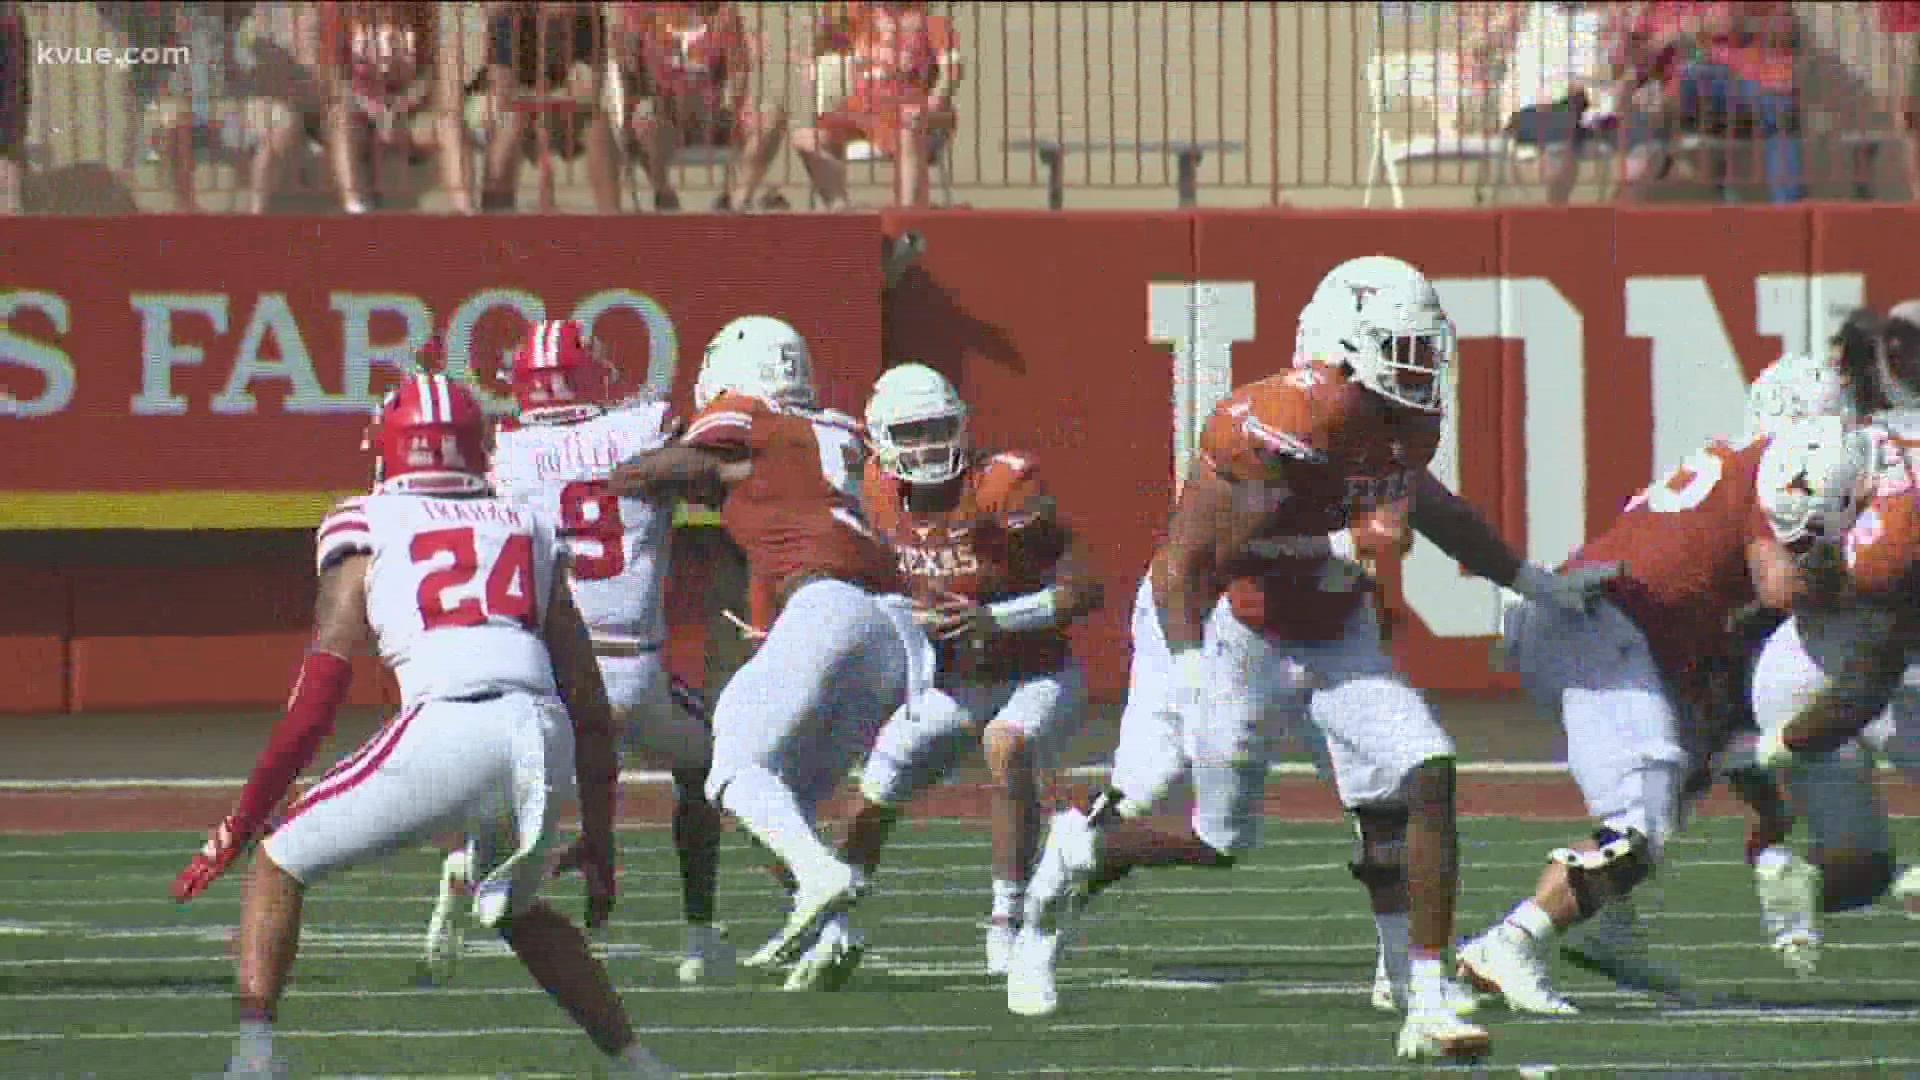 The Texas Longhorns started the 2021 season off strong with a 38-18 win against the No. 23 ranked Louisiana Ragin Cajuns.